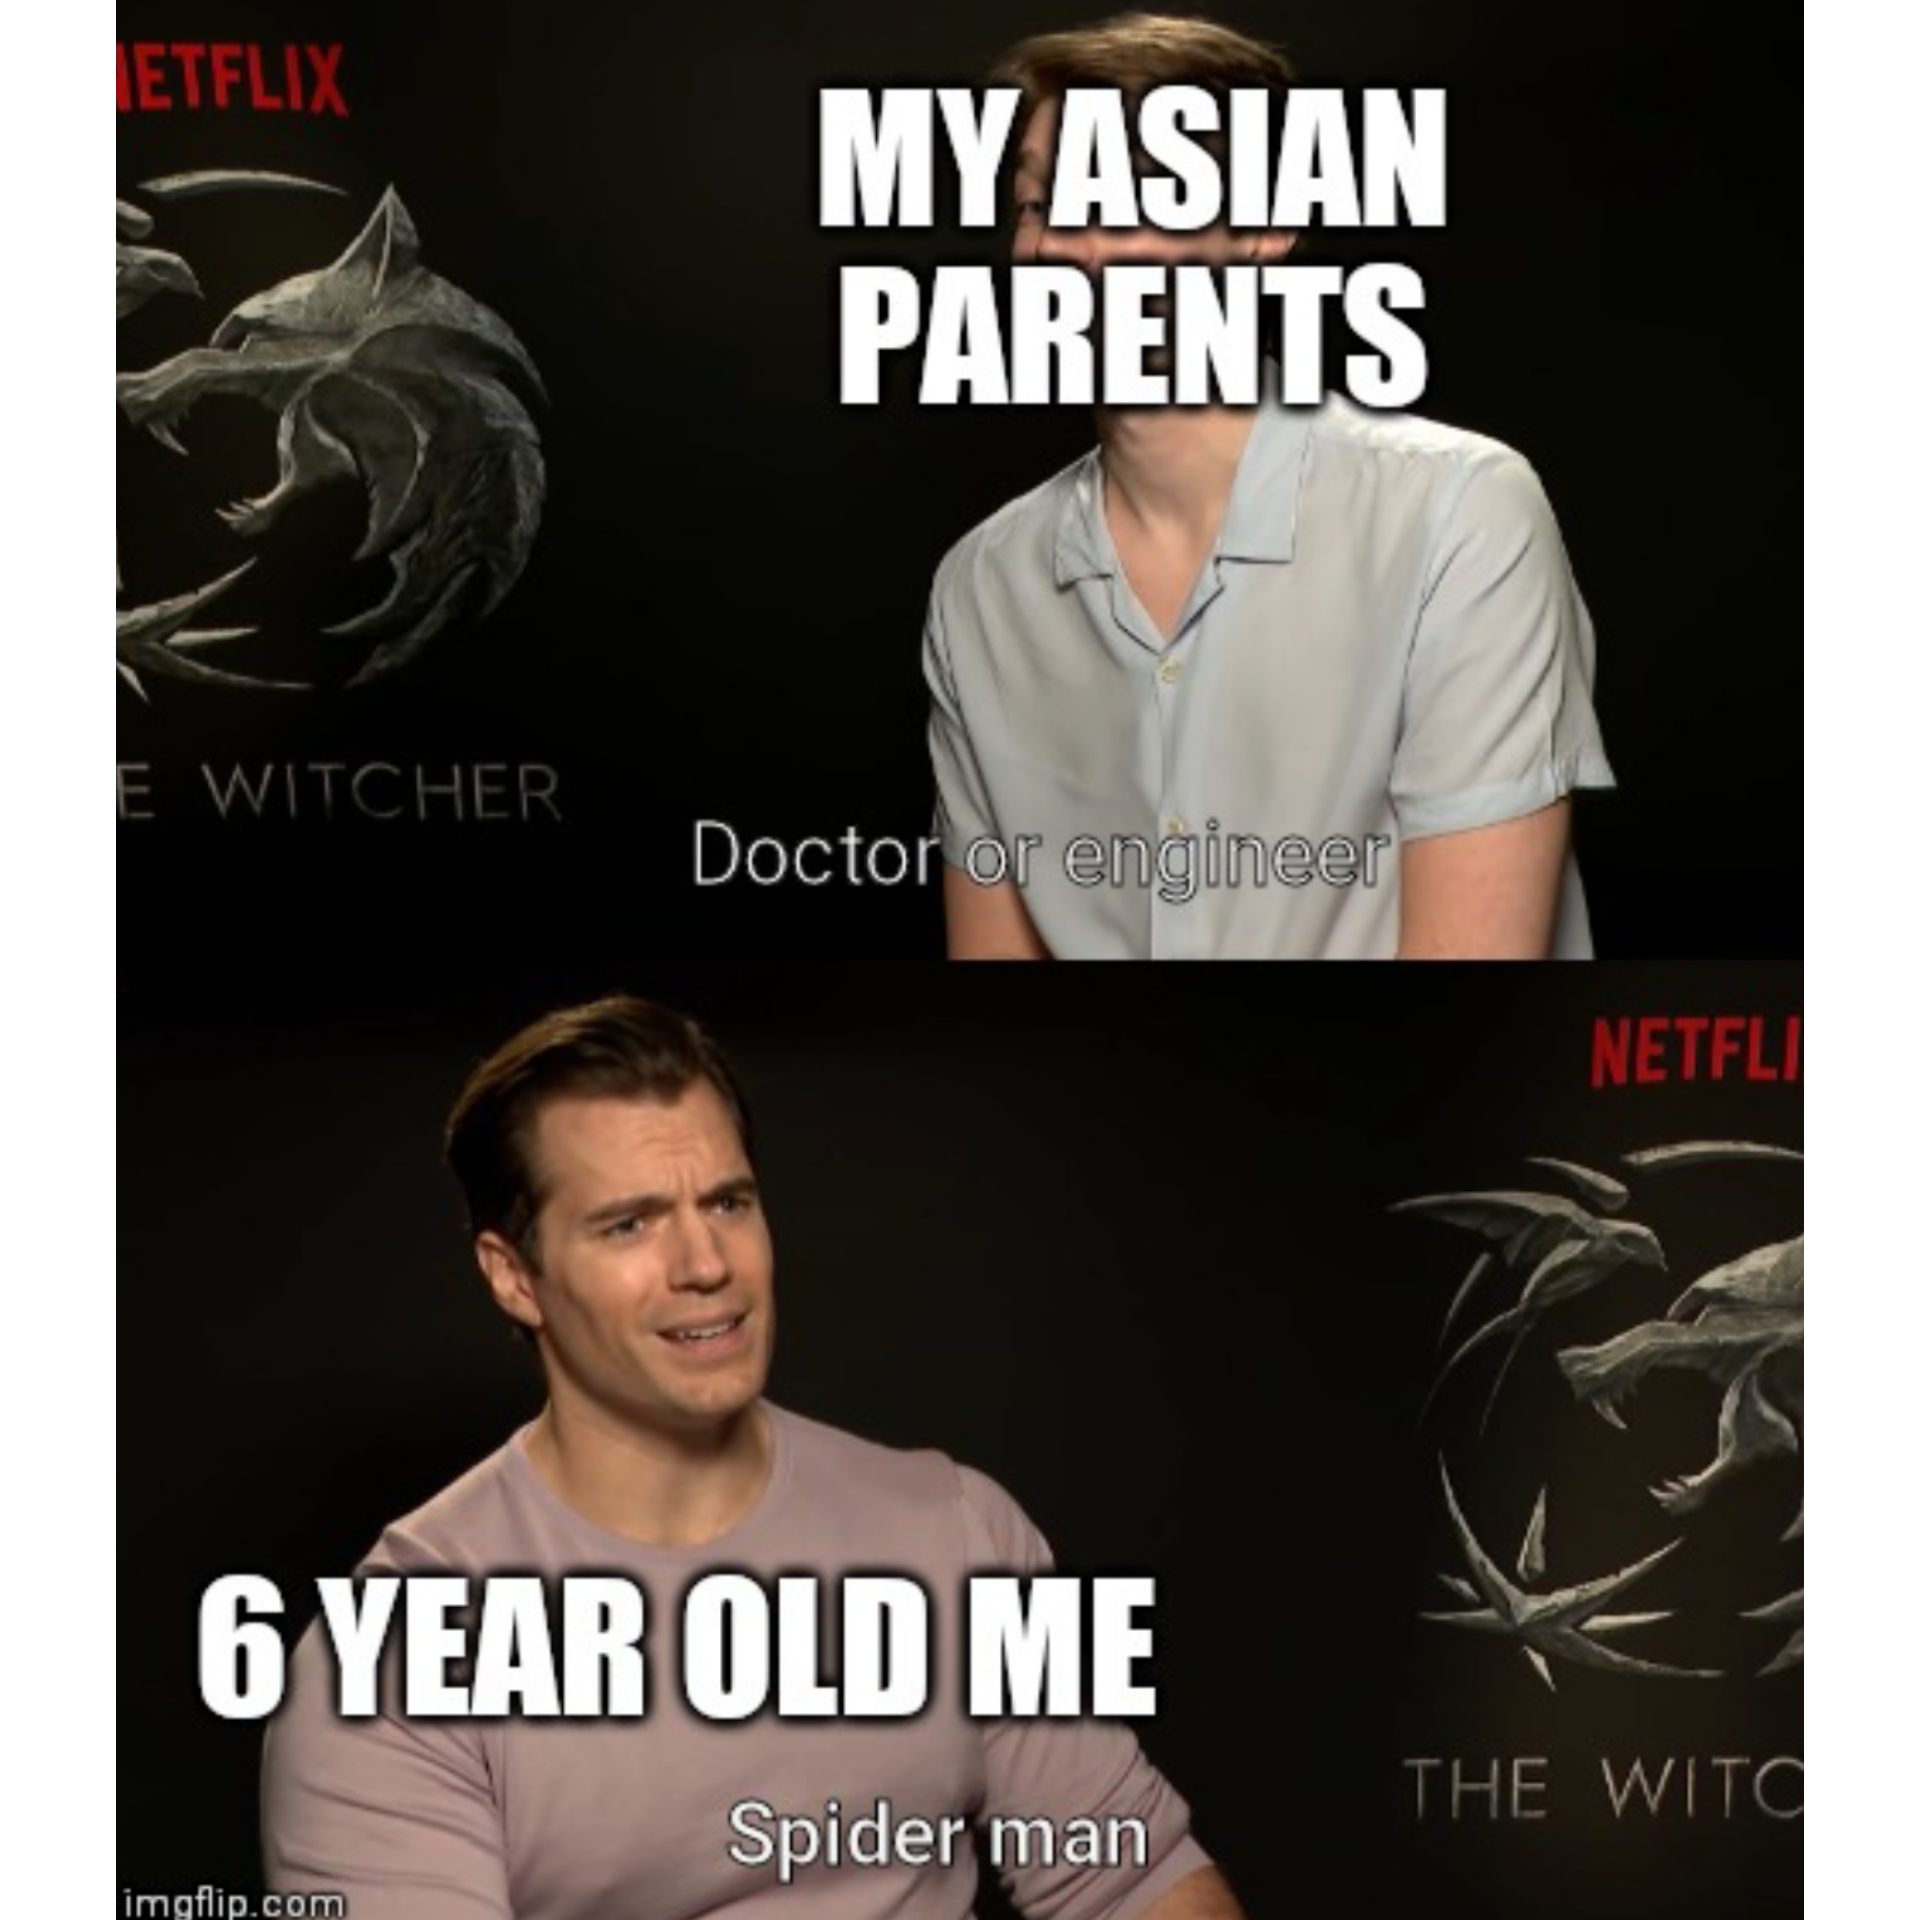 dank memes - roll20 meme - Etflix My Asian Parents E Witcher Doctor or engineer Netfl 6 Year Old Me The Witc Spider man imgflip.com